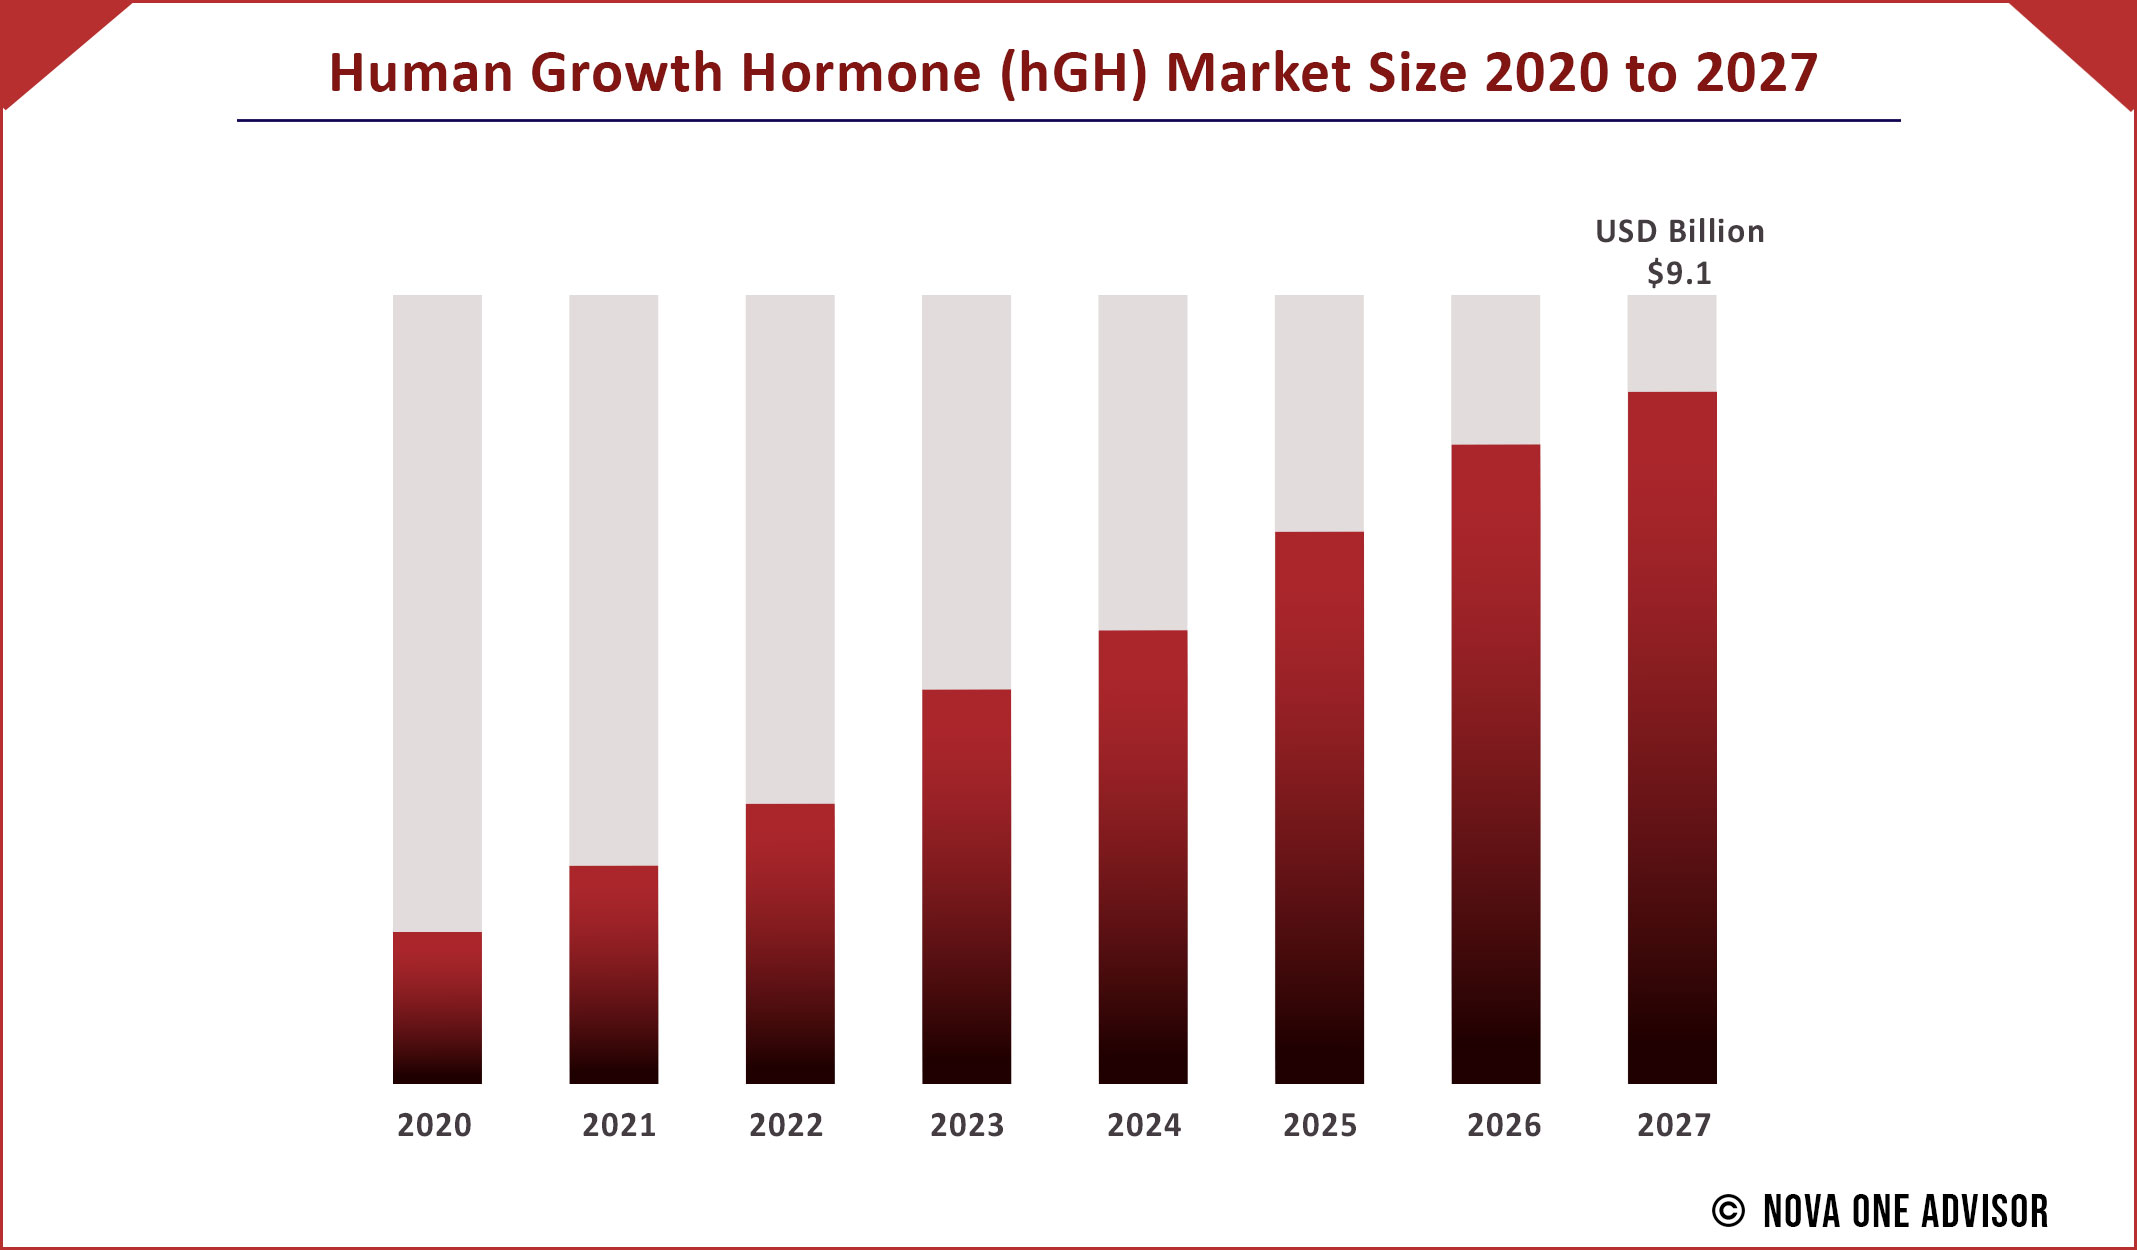 Human Growth Hormone (hGH) Market Size 2020 to 2027